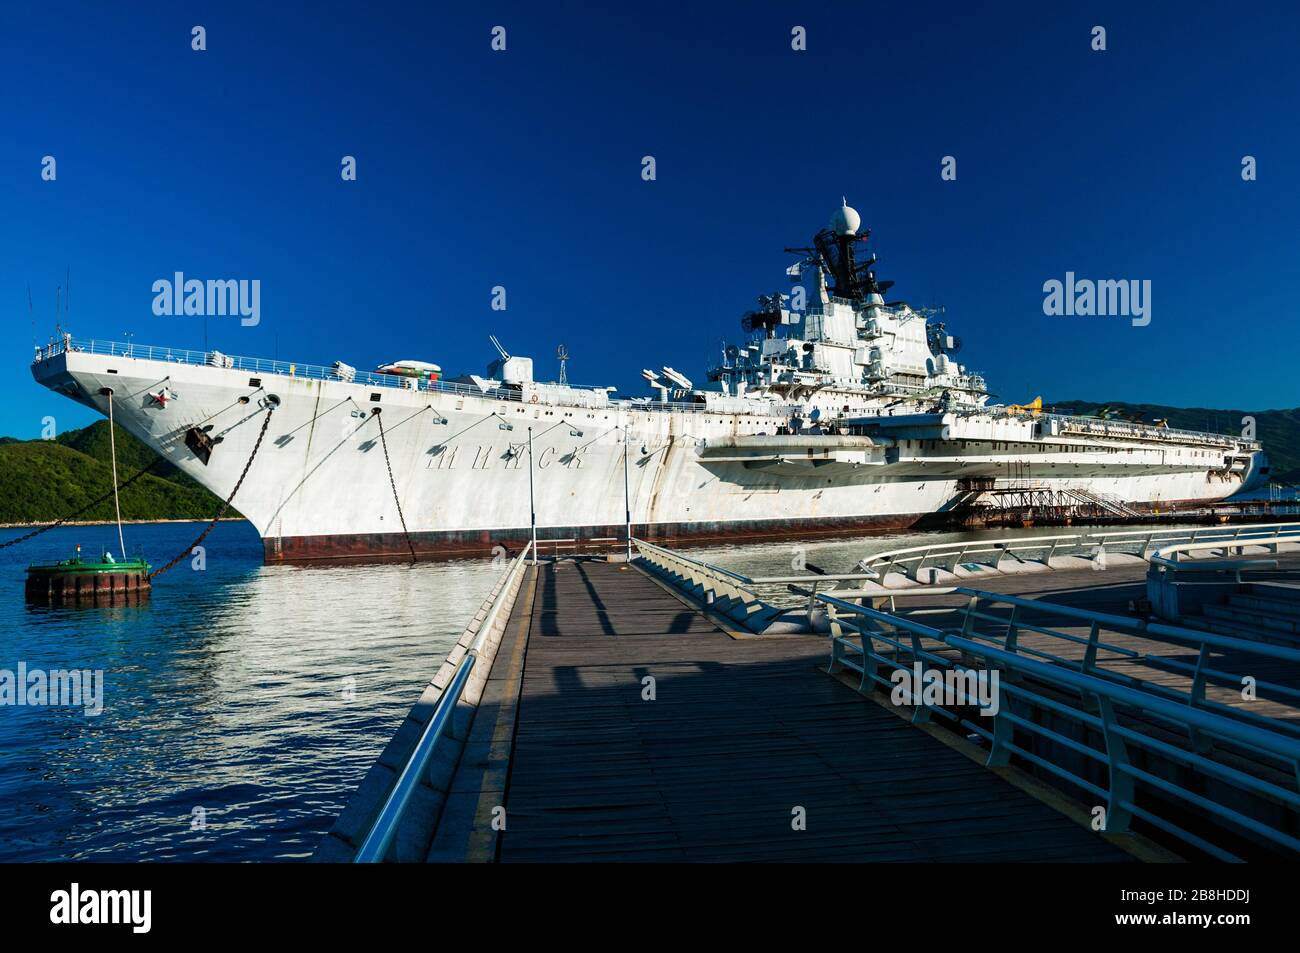 Minsk is an old Soviet aircraft carrier in use as a military theme park in Yantian, Shenzhen, China. On the deck are warplanes Stock Photo